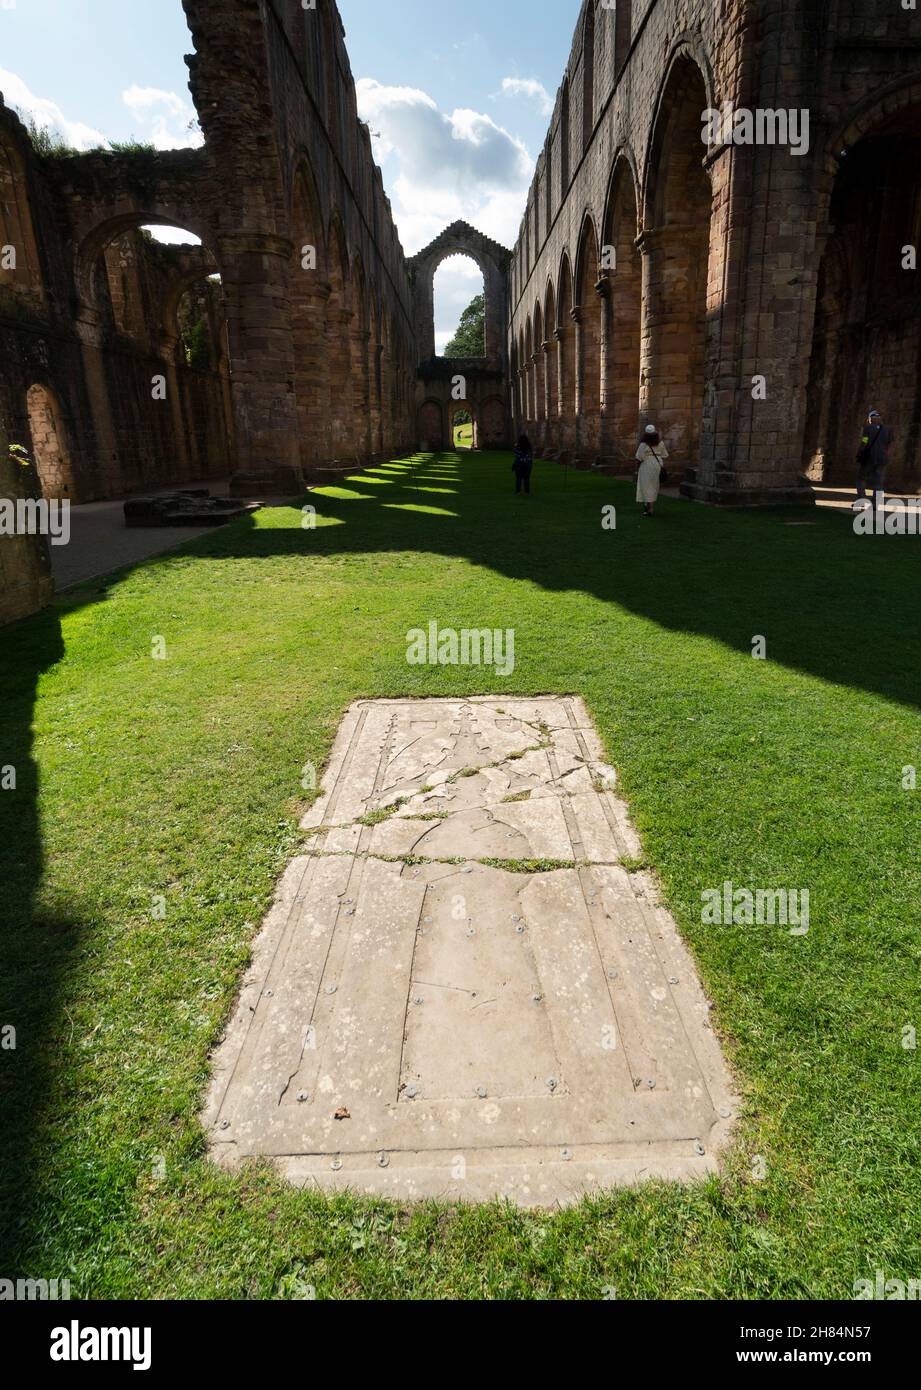 Fountains Abbey, Ripon, North Yorkshire, England - Cistercian abbey mostly dating from 13th to 15th centuries. Abbot's grave. Stock Photo